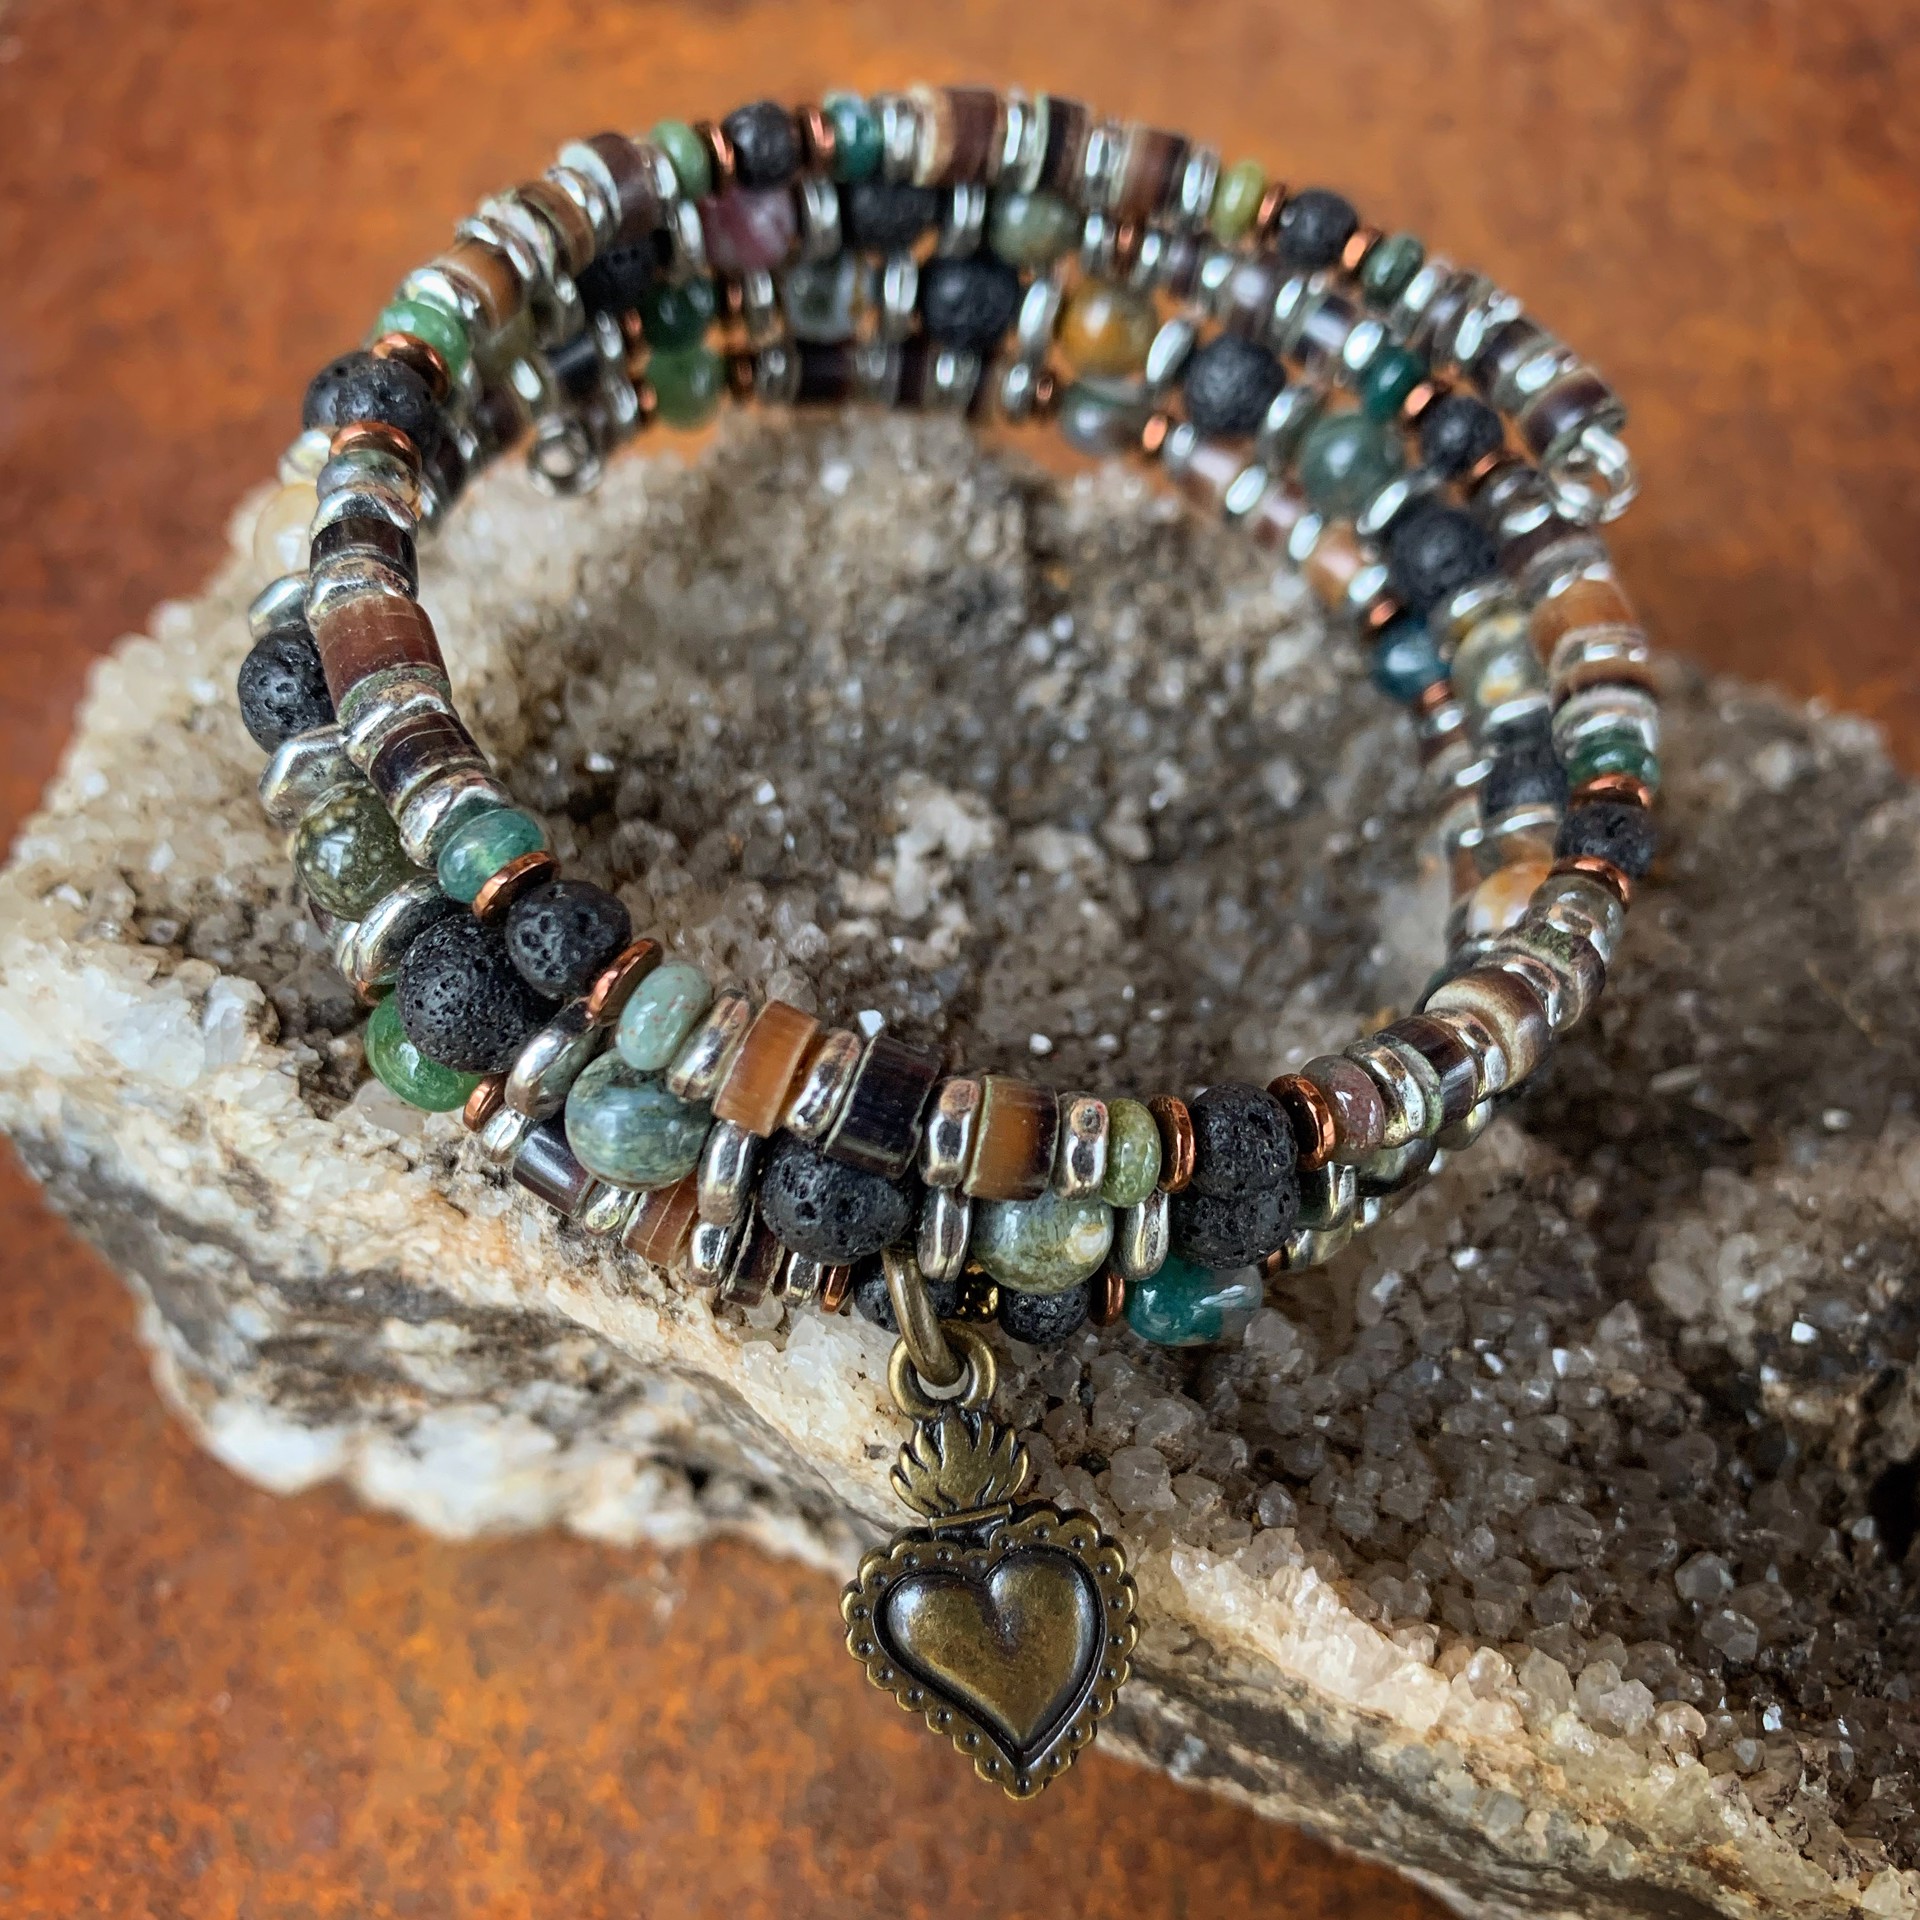 K751 Triple Wrap Sacred Heart Bracelet with Lava and Jasper by Kelly Ormsby